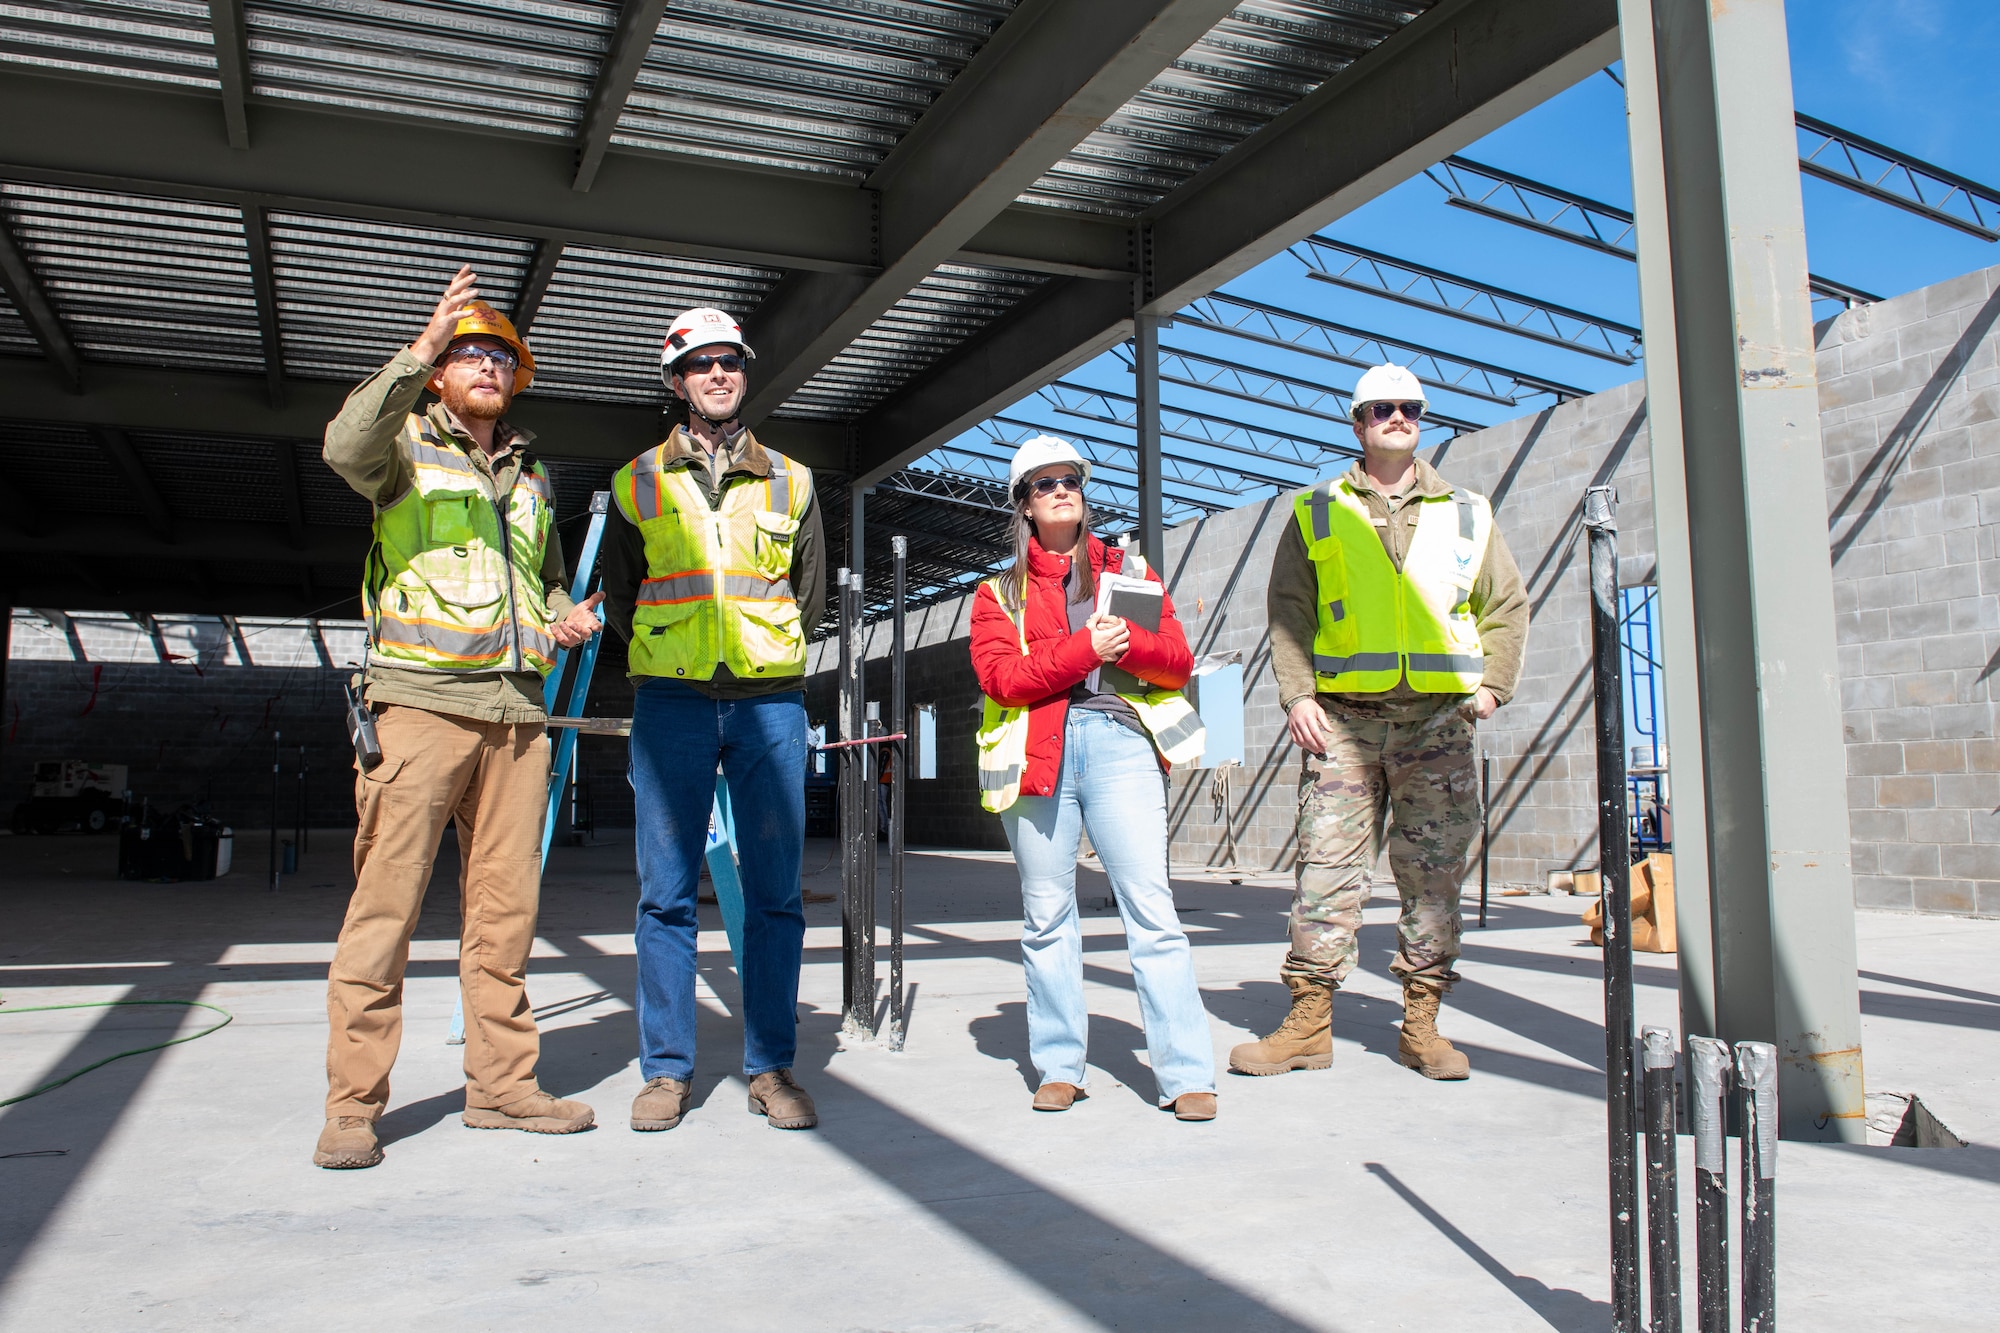 Four engineers stand in a facility that is being constructed to observe the progress that has been made.